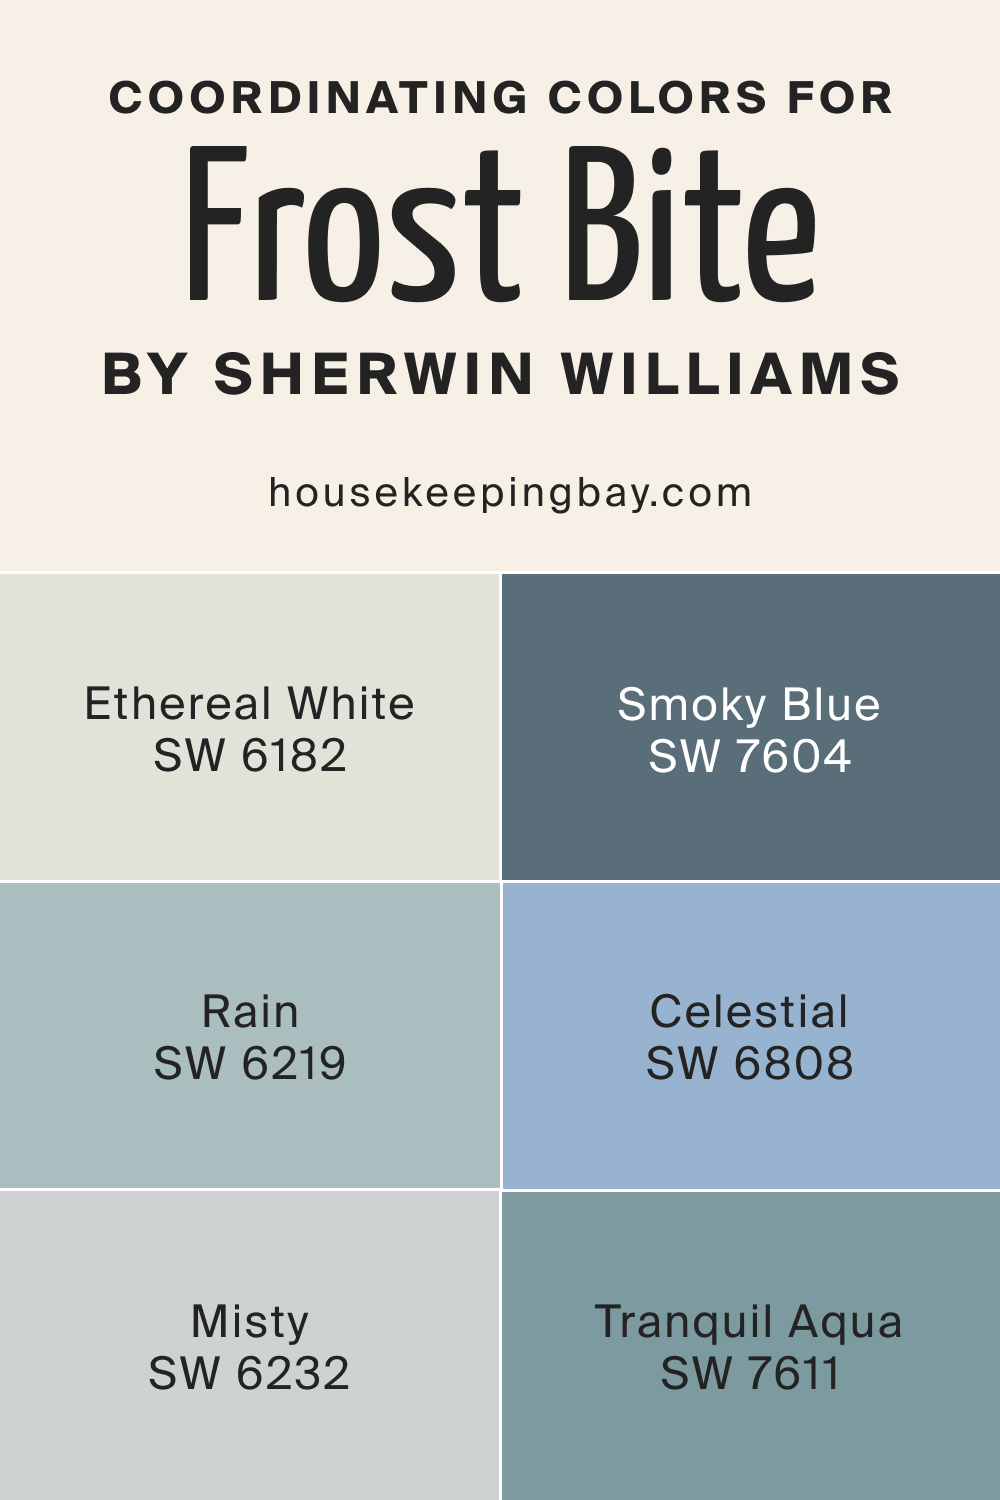 Coordinating Colors for SW 9505 Frost Bite by Sherwin Williams